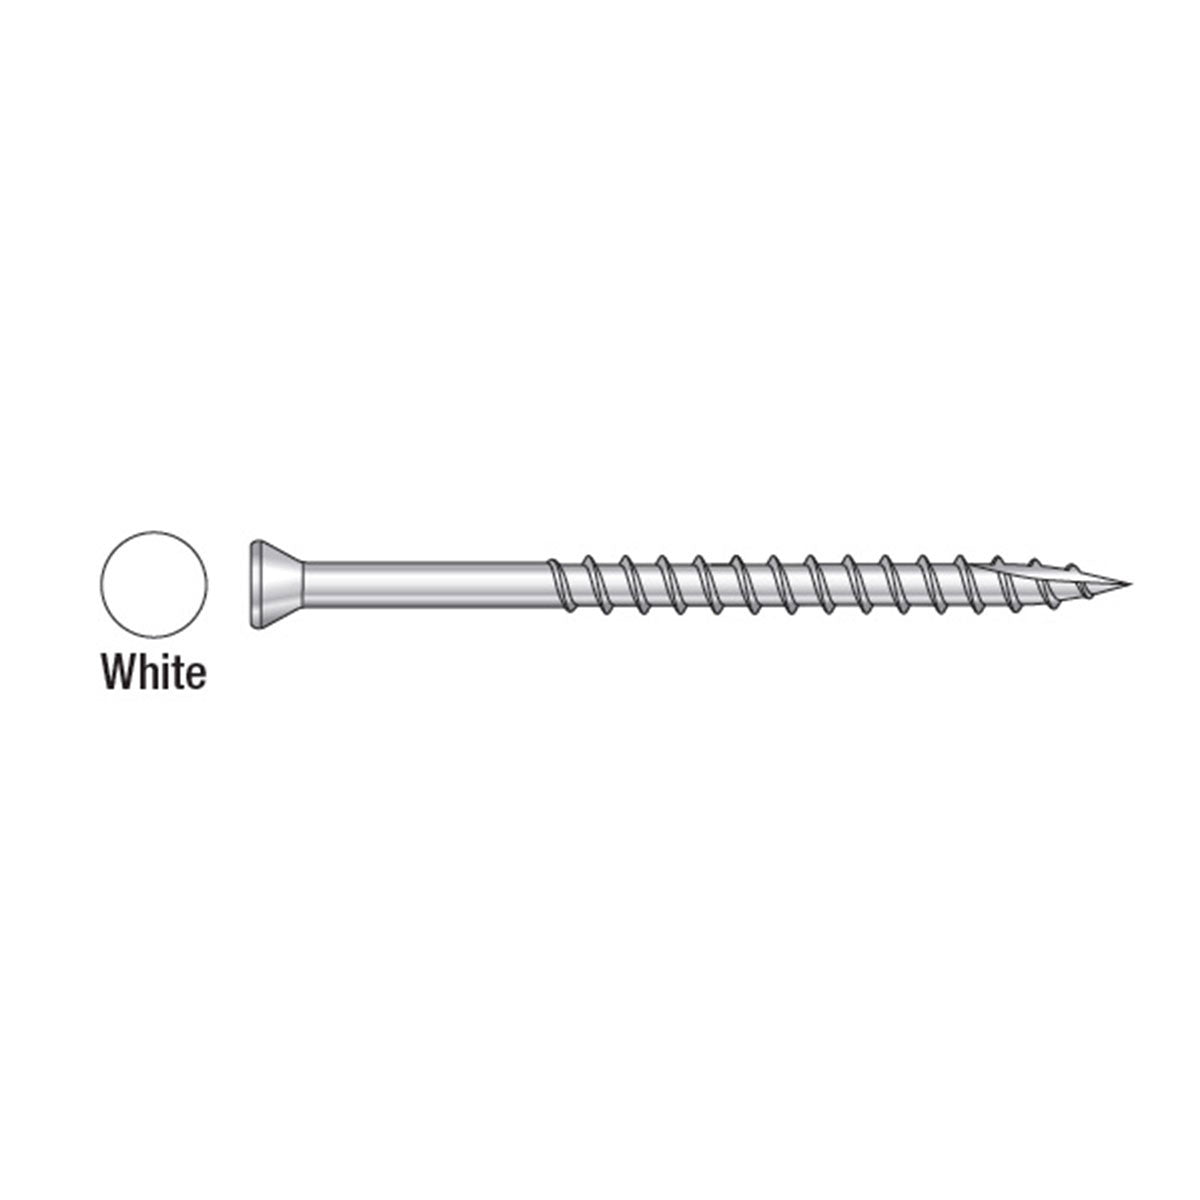 S07225FT1WH01 #7 2-1/4" Type 305 Stainless Steel 6 Lobe Drive Trim Head Screws Painted White - 1 Pound Box